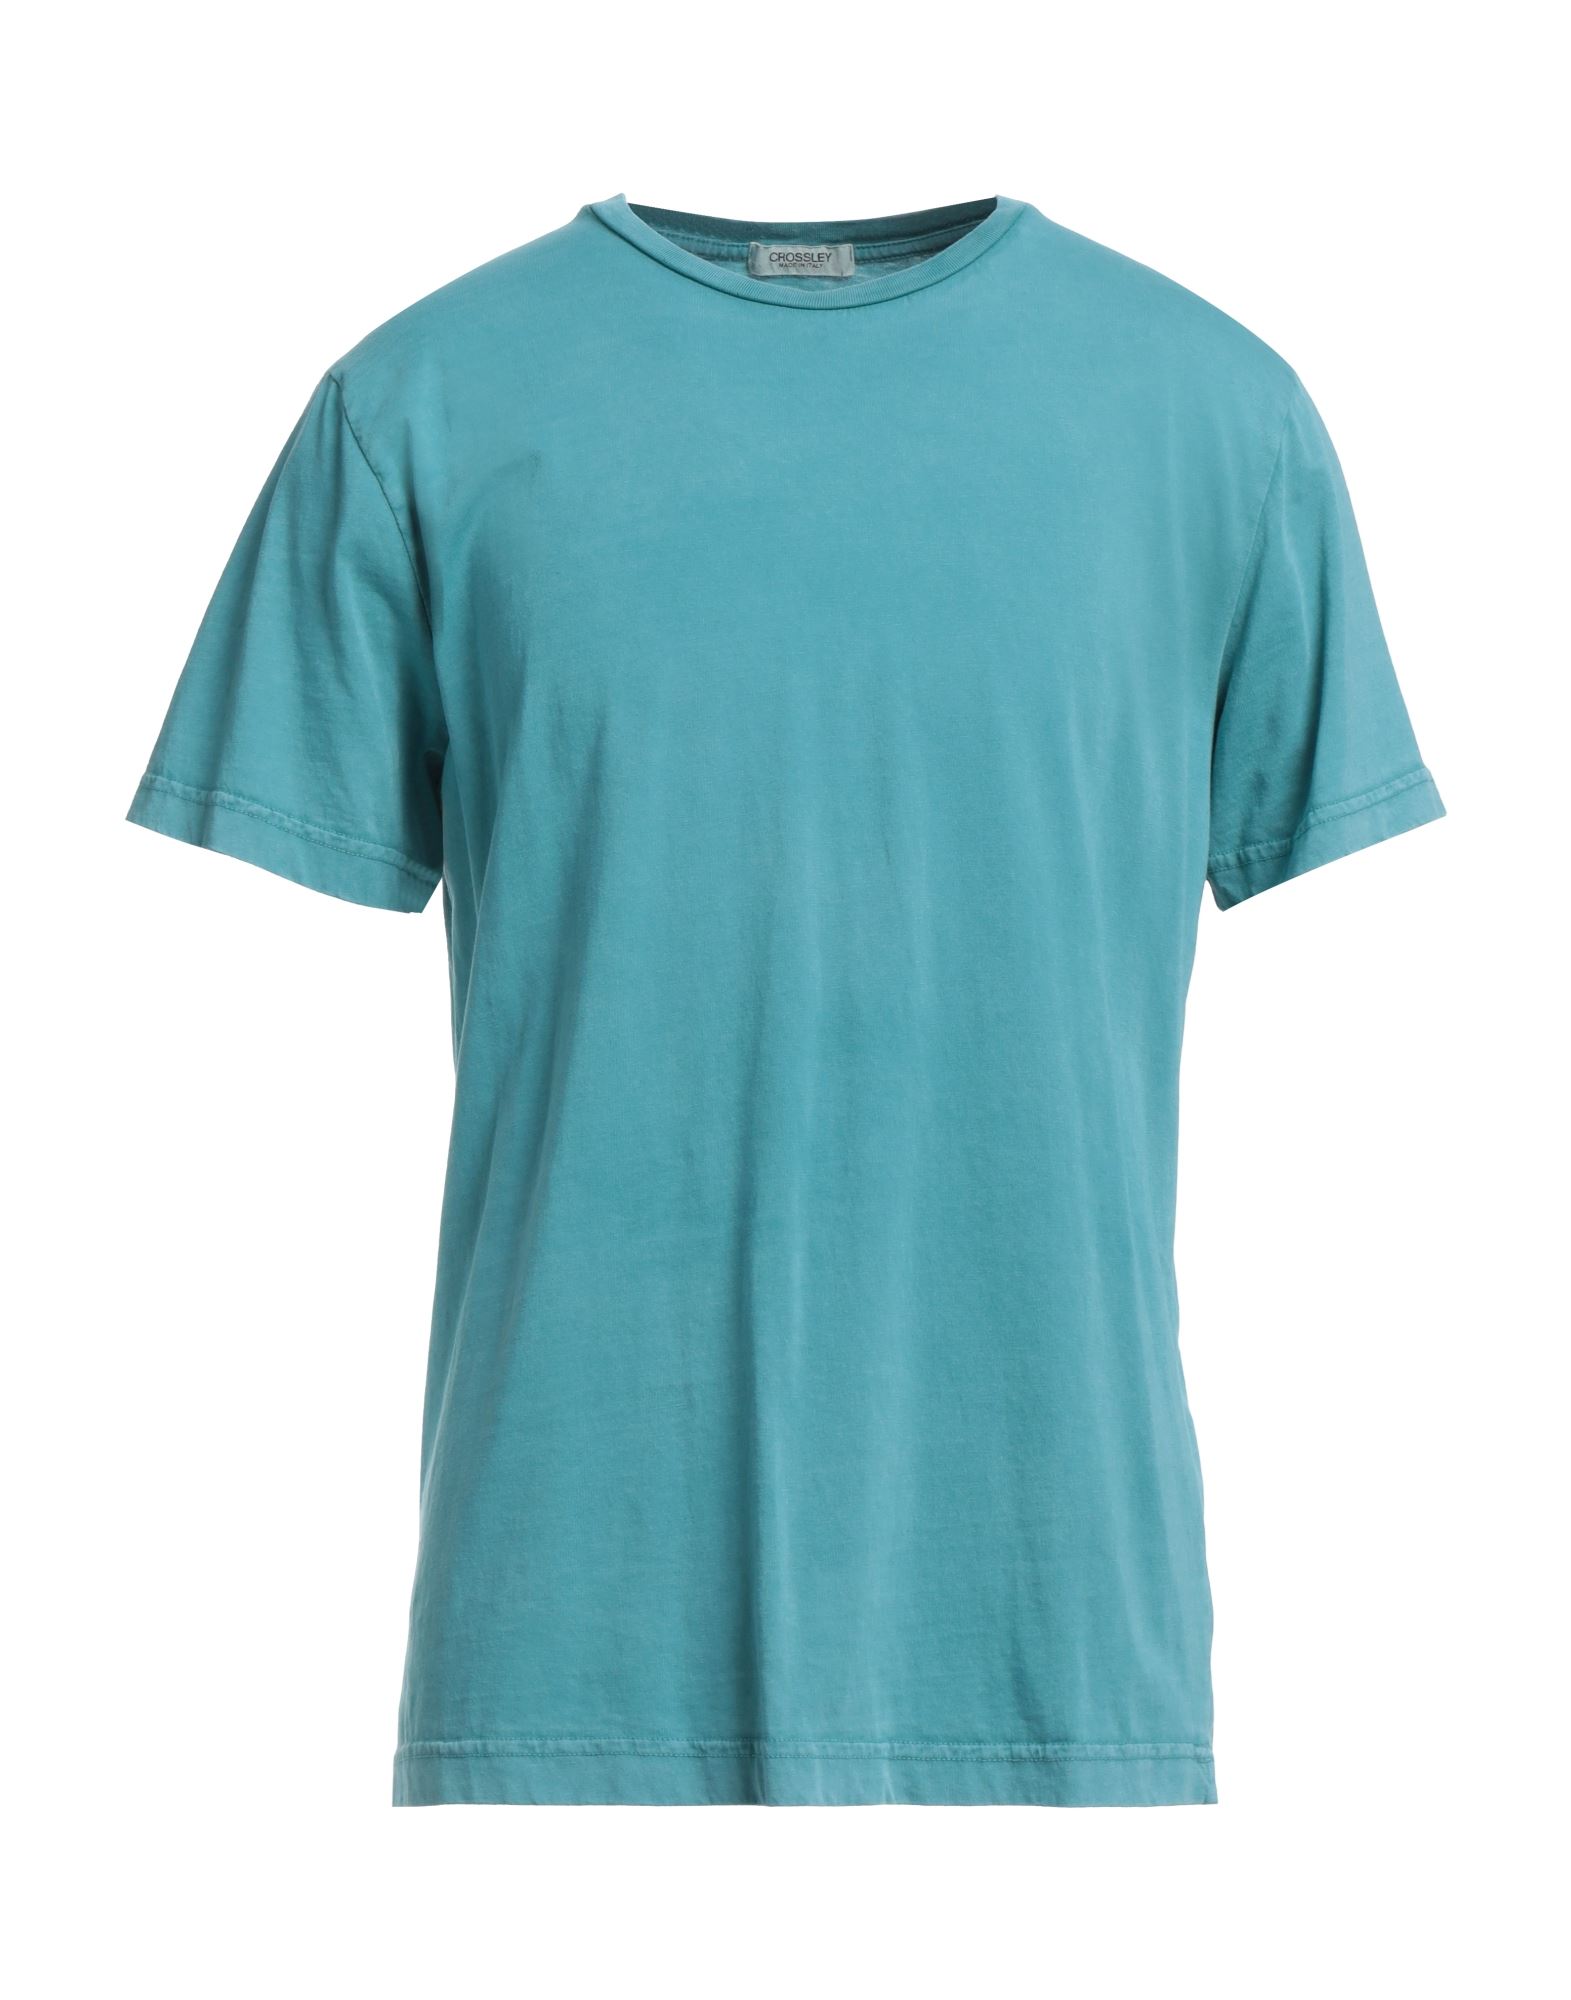 Crossley Man T-shirt Turquoise Size L Cotton In Blue